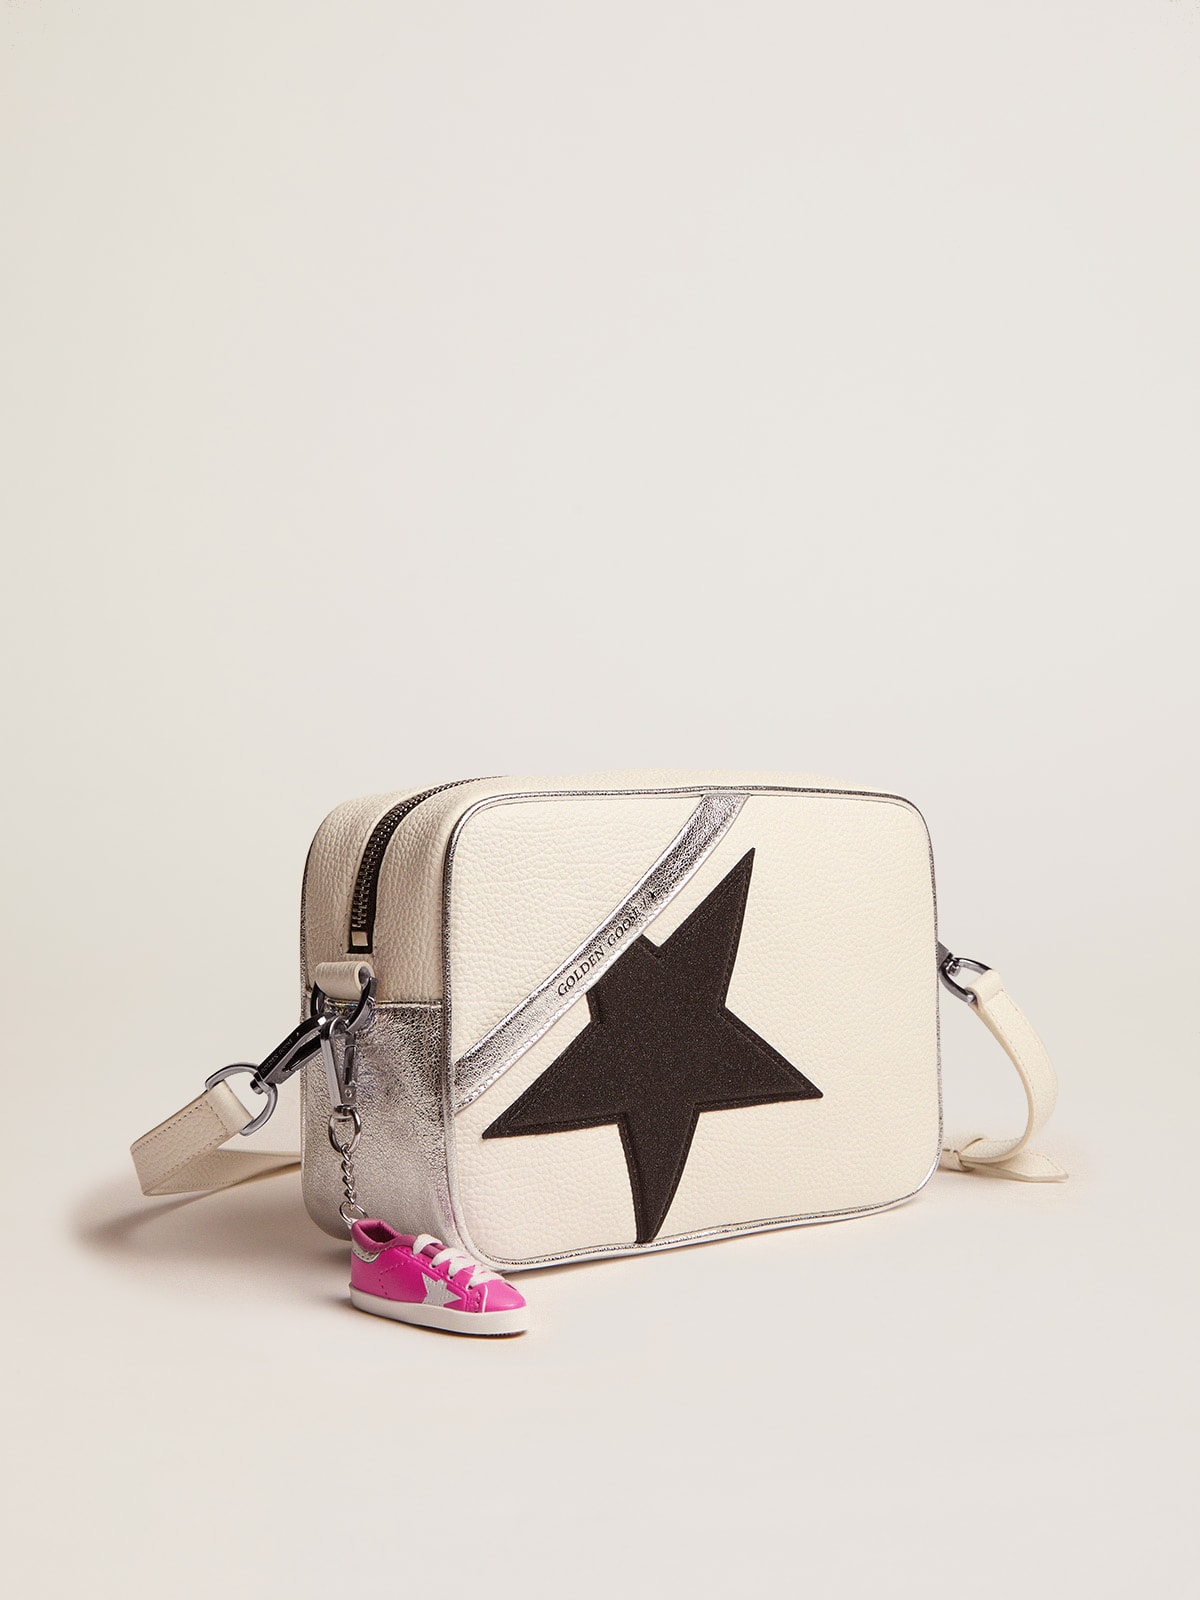 Golden Goose - Star Bag in white hammered leather, metallic silver trim and black glitter star in 